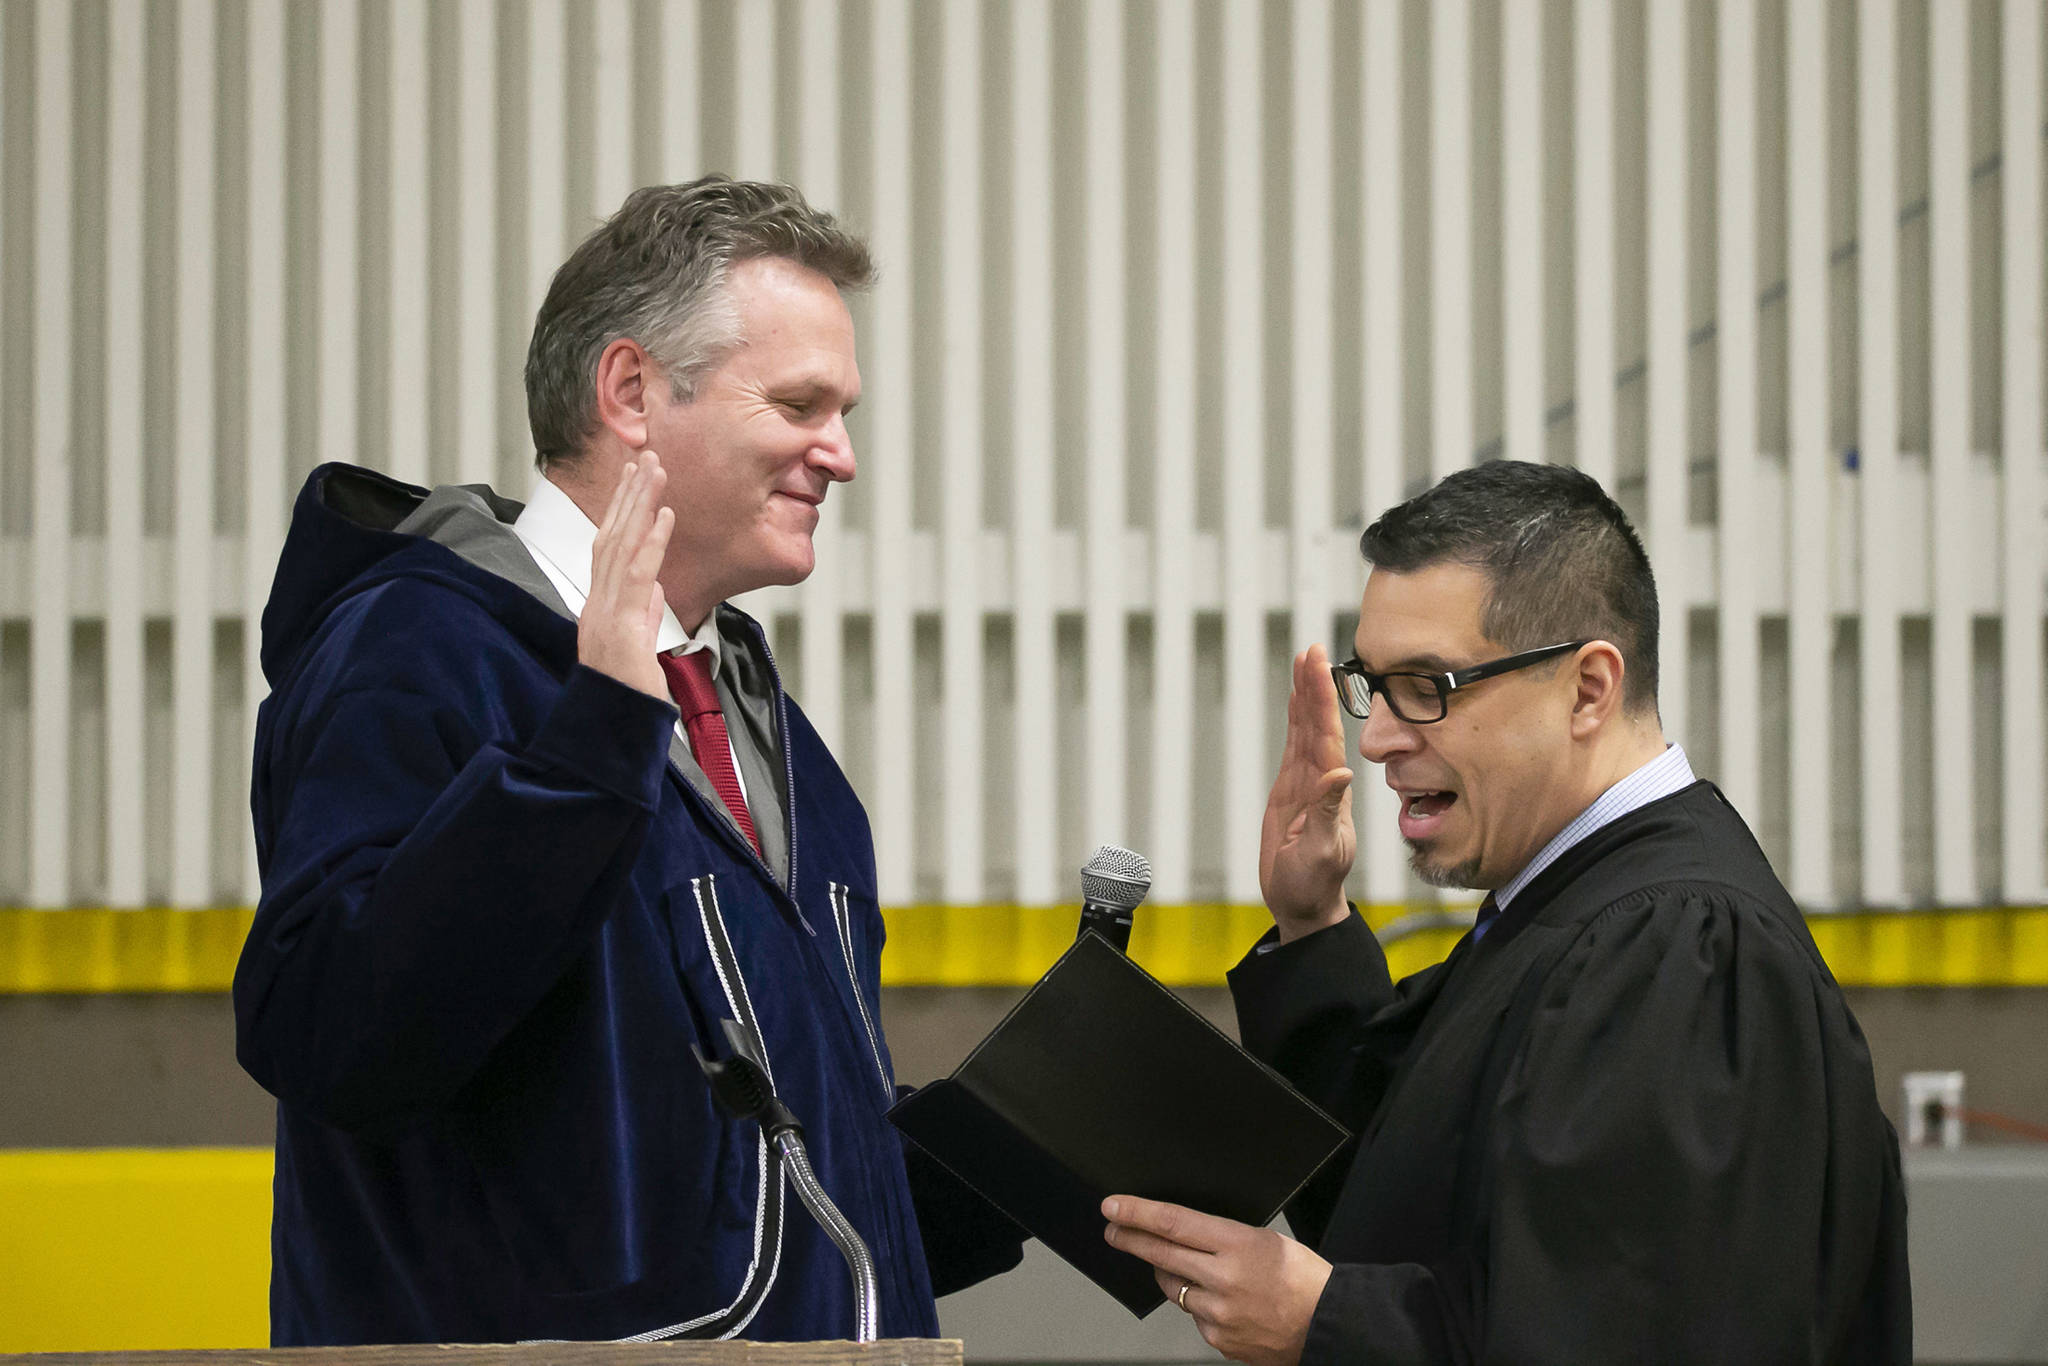 Mike Dunleavy, left, is sworn into office as Alaska’s governor by Superior Court Judge Paul Roetman in Kotzebue, Alaska, on Monday, Dec. 3, 2018. Poor visibility forced Dunleavey’s swearing-in ceremony to be held in Kotzebue instead of Noorvik, Alaska, his wife’s hometown. (Stanley Wright/Alaska Governor’s Office via AP)